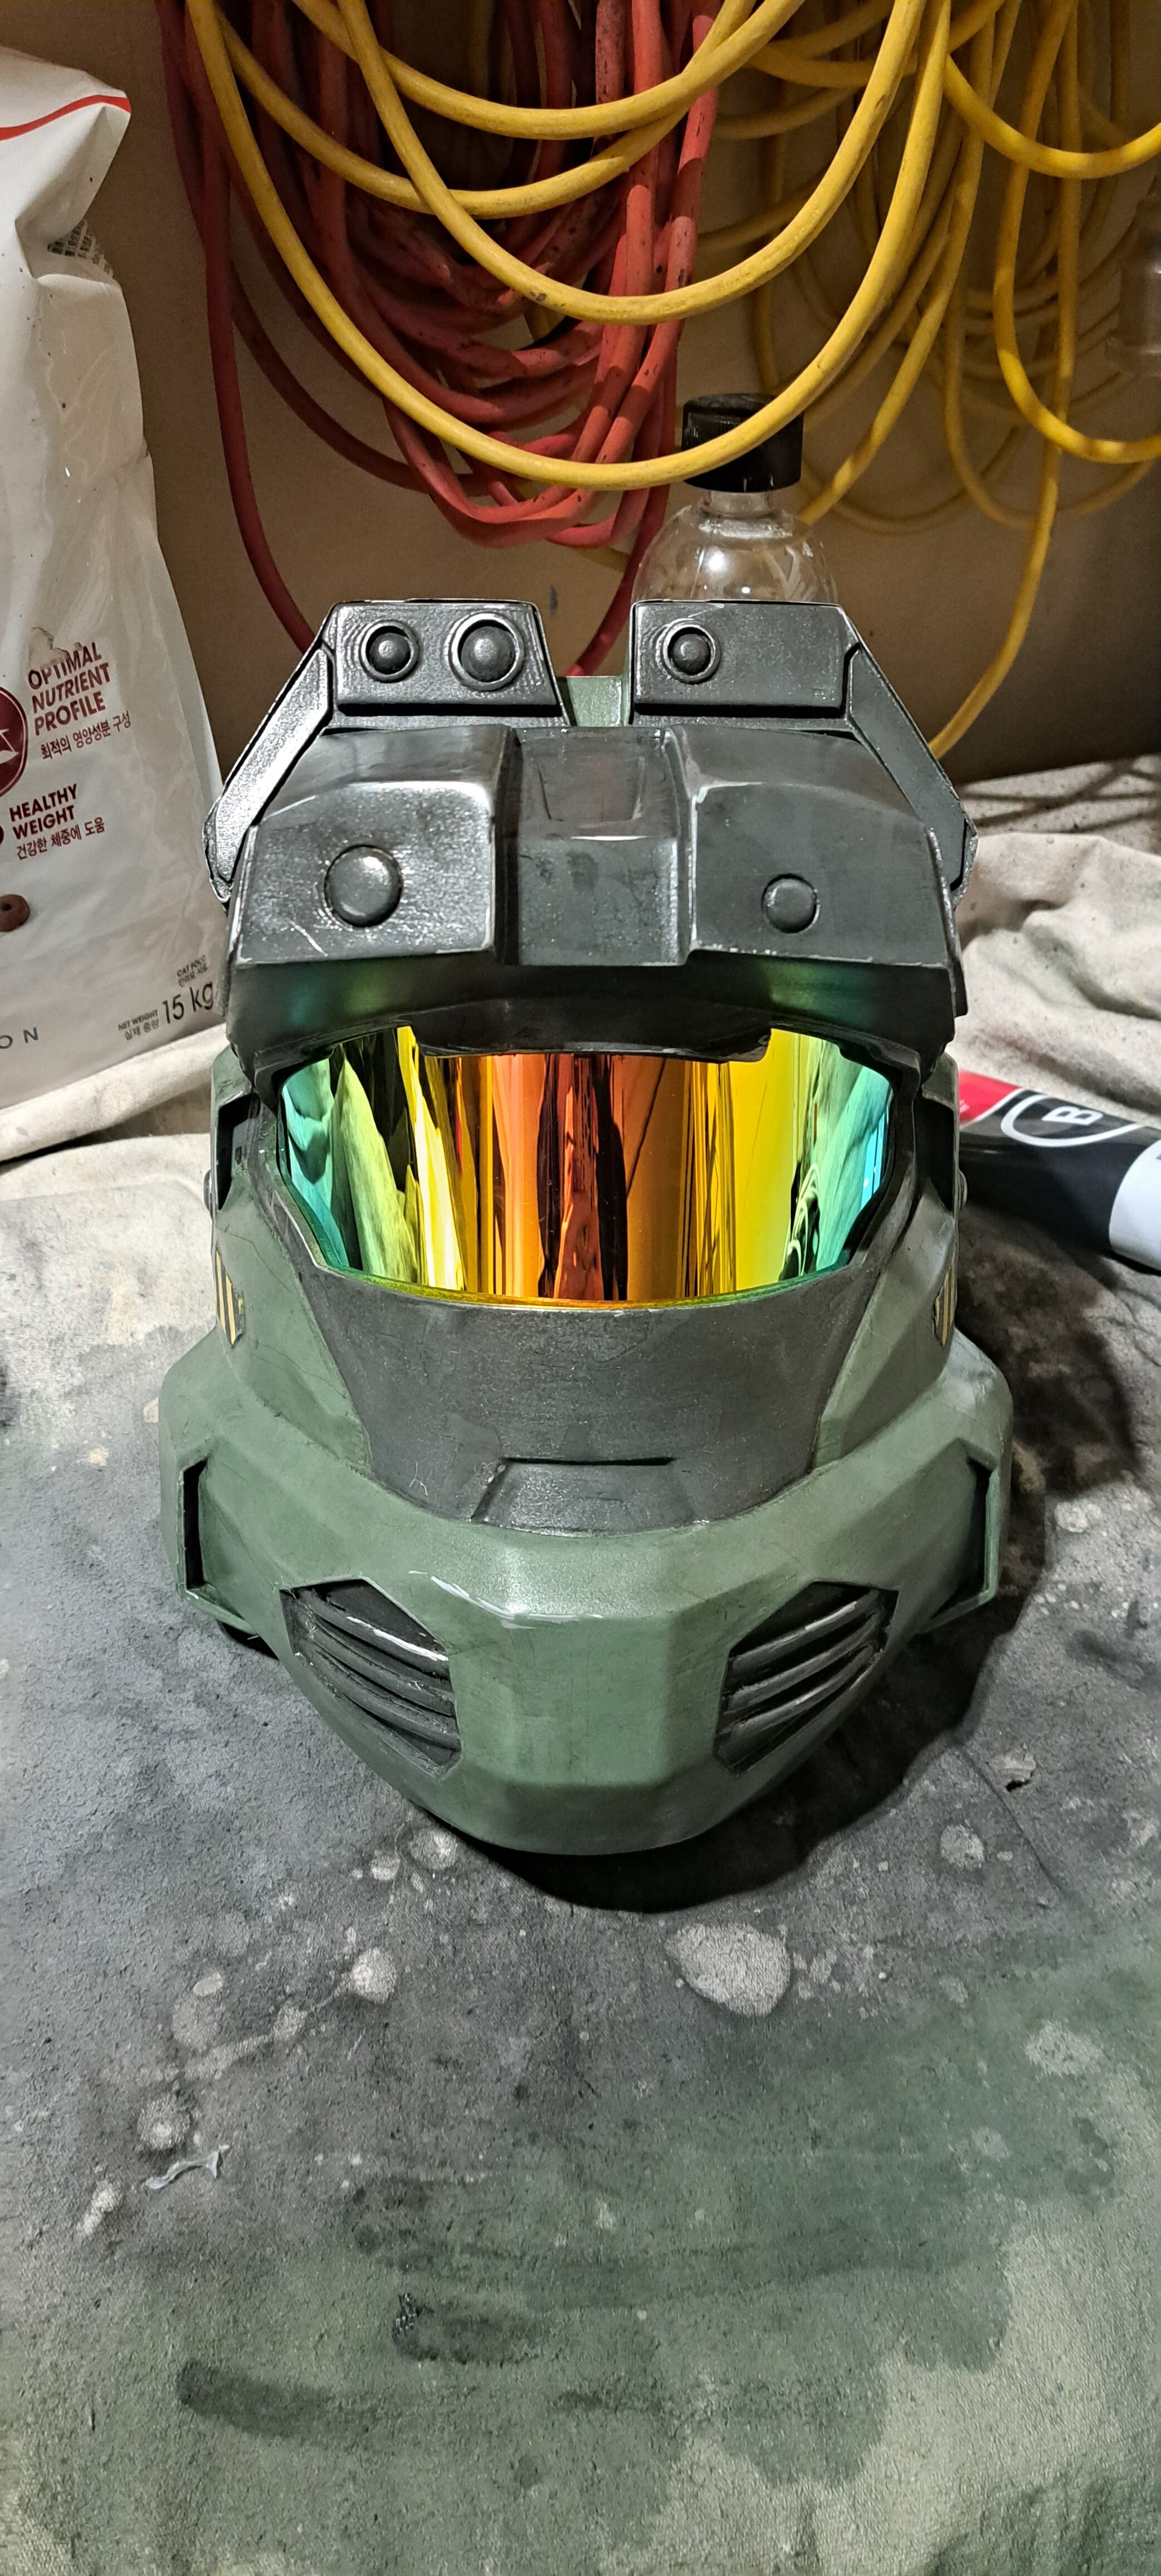 Completed helmet (front view)